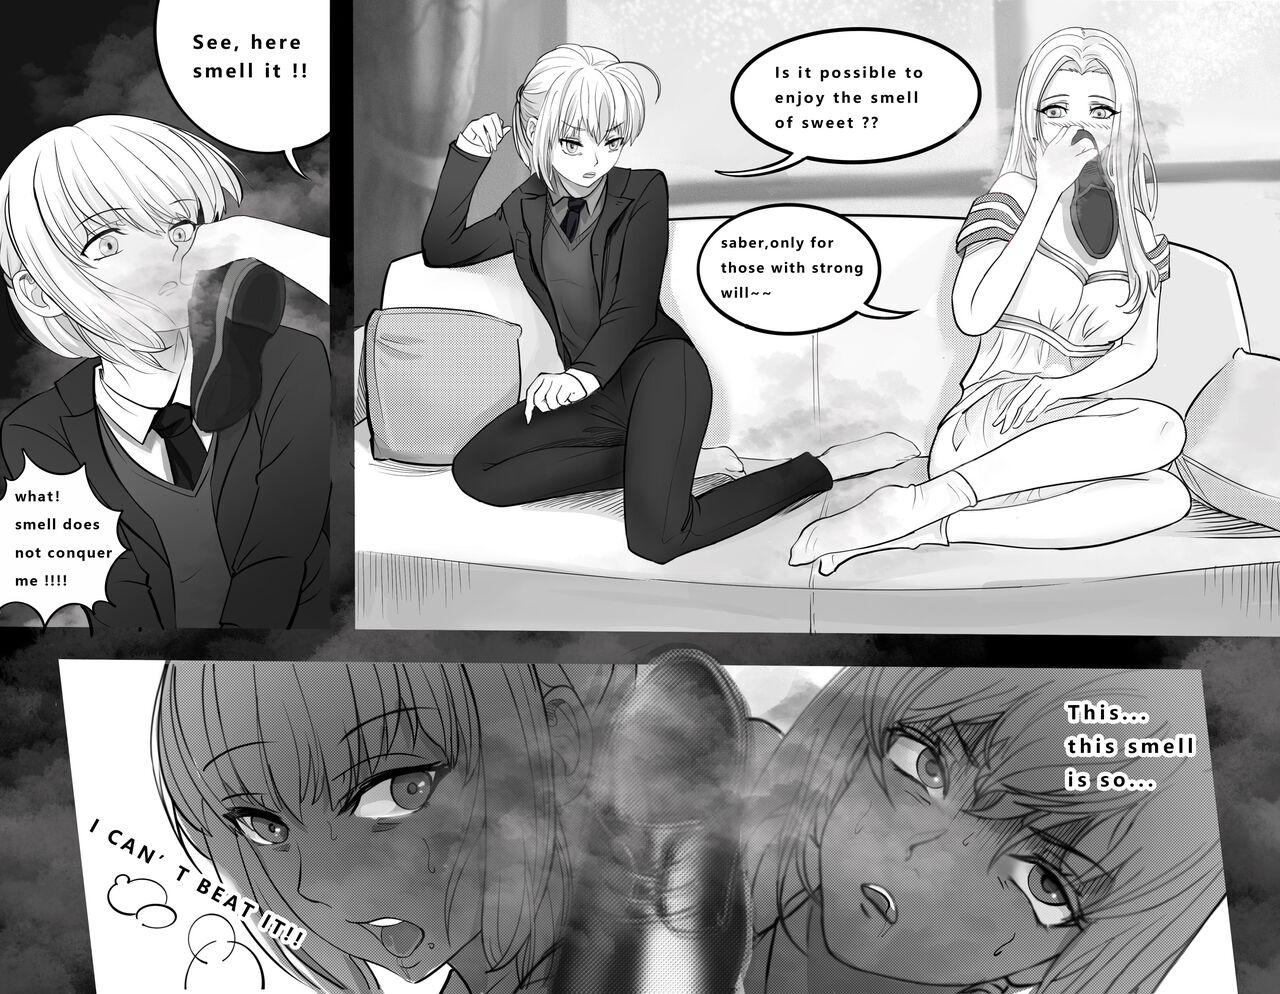 Balls FATE REQUEST ENGLISH VERSION - Fate stay night Cougars - Page 3